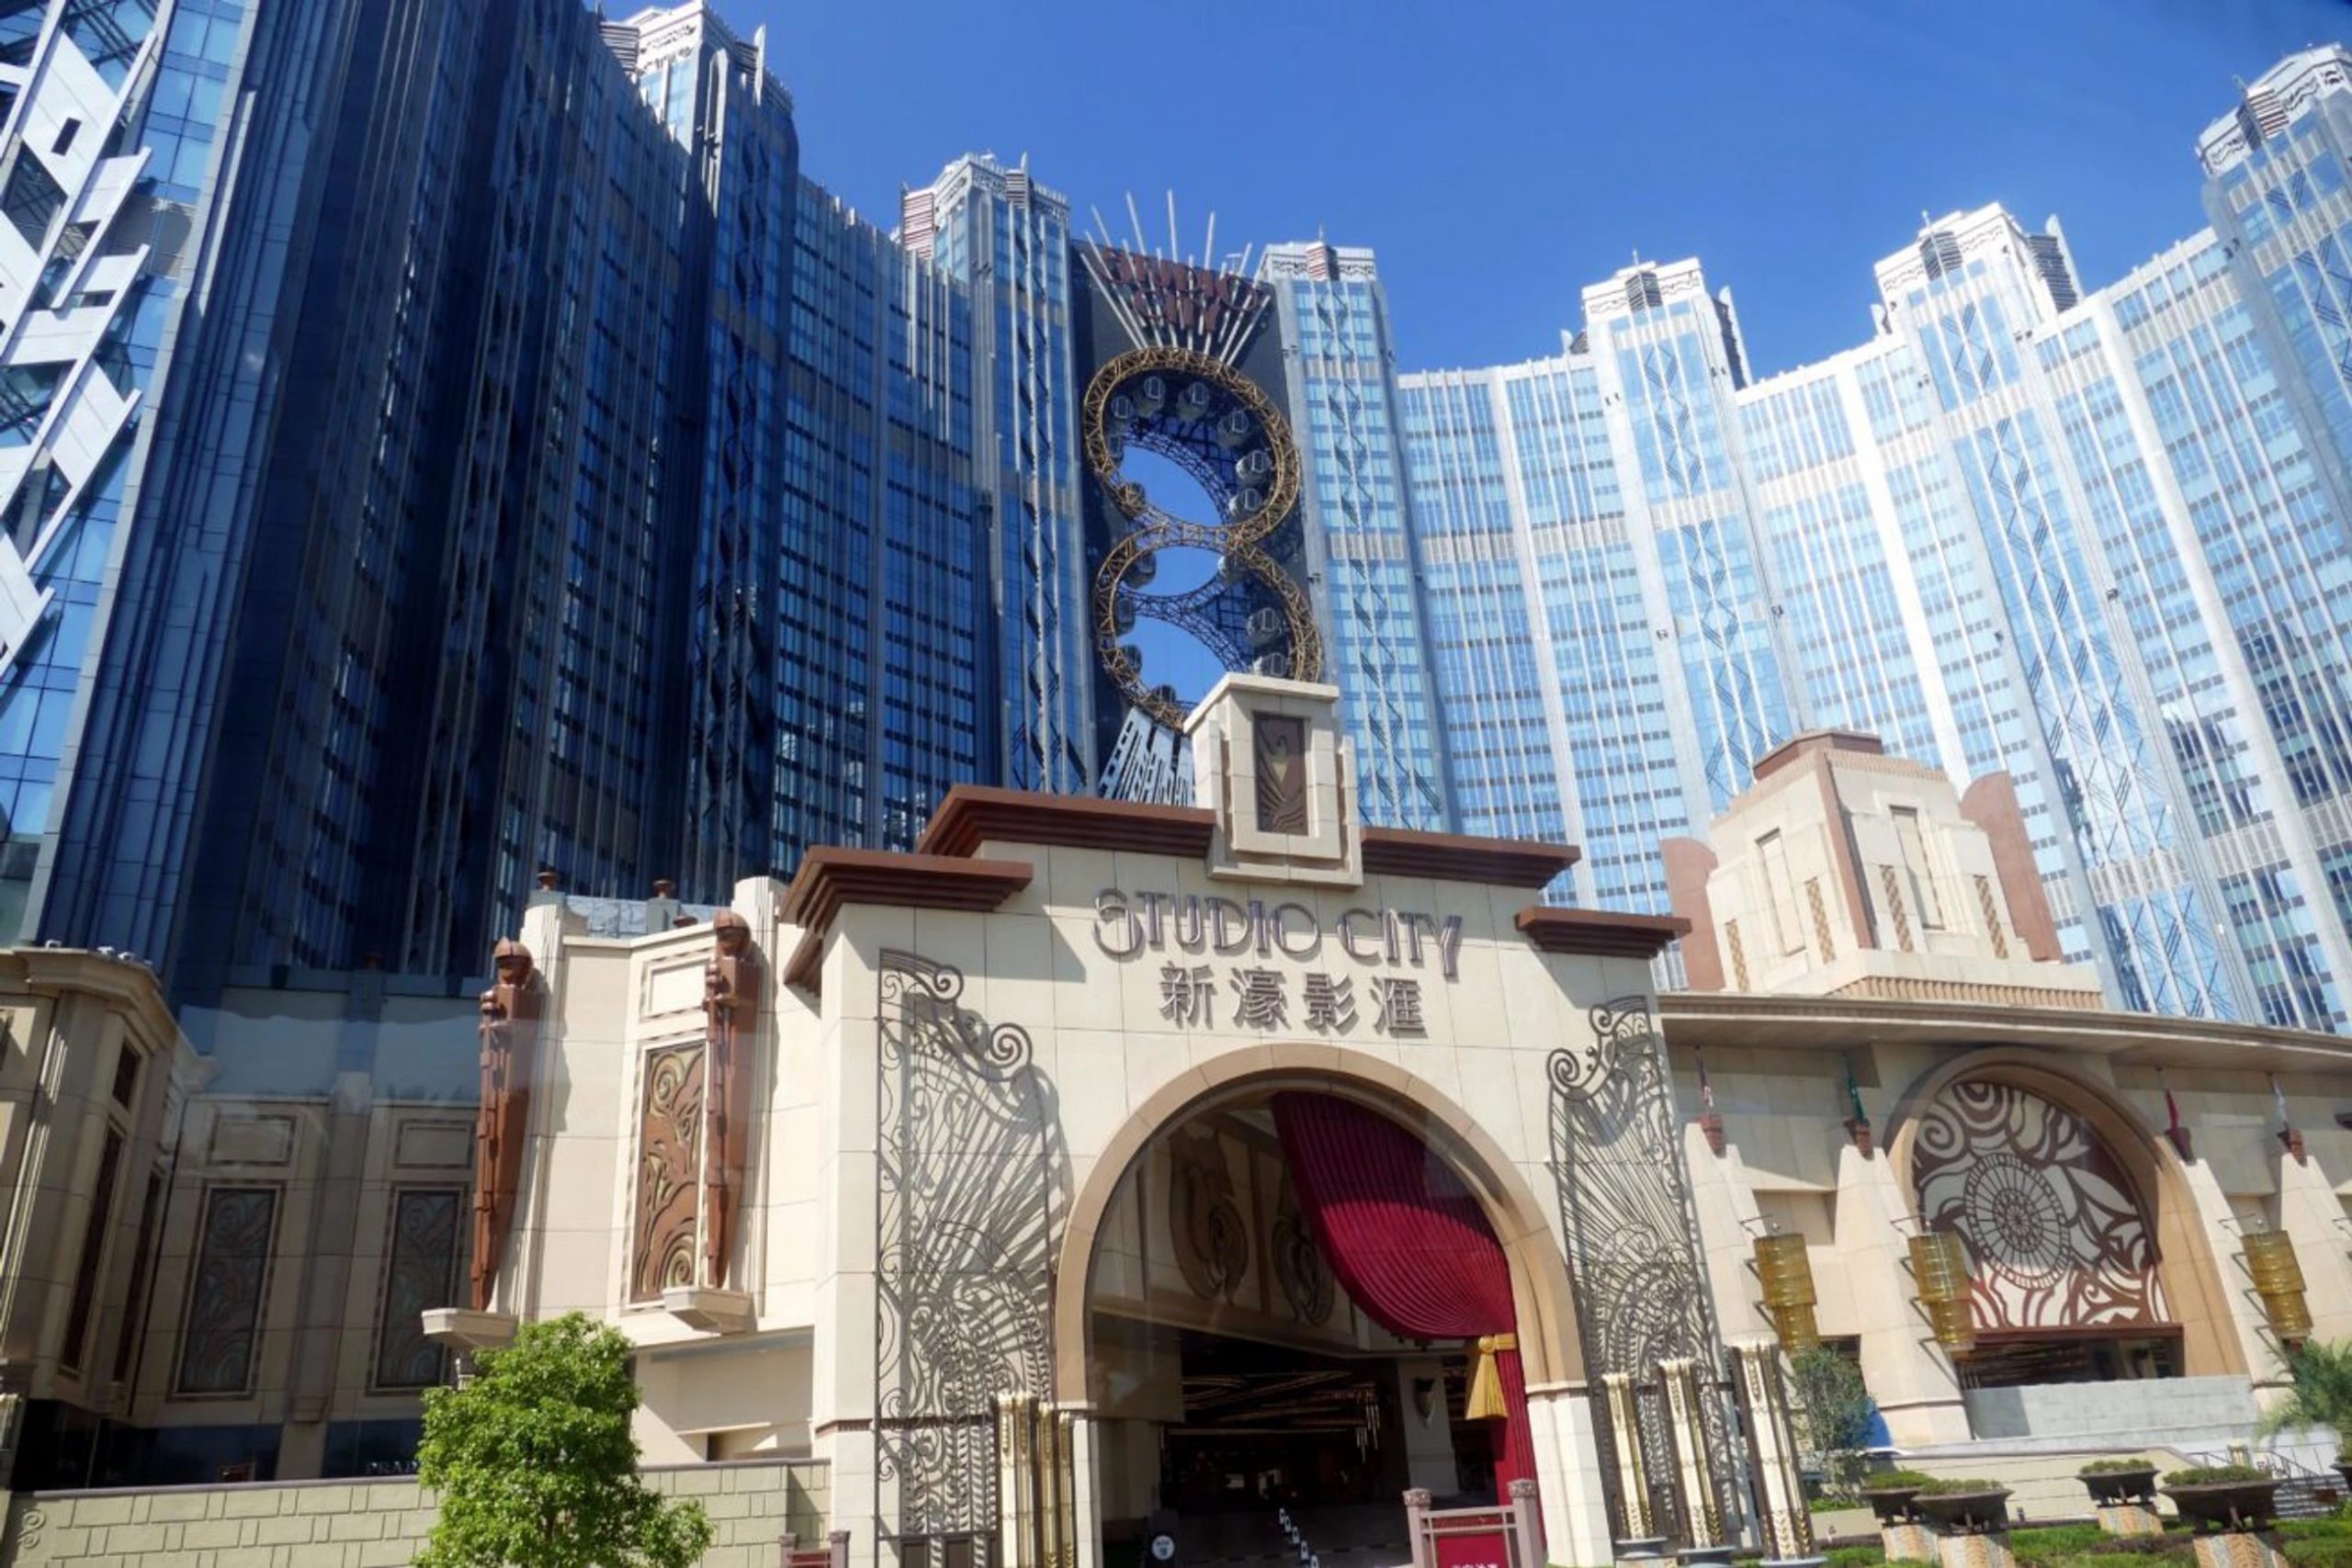 Venetian, Palazzo to remain open without layoffs, Sands says, Casinos &  Gaming